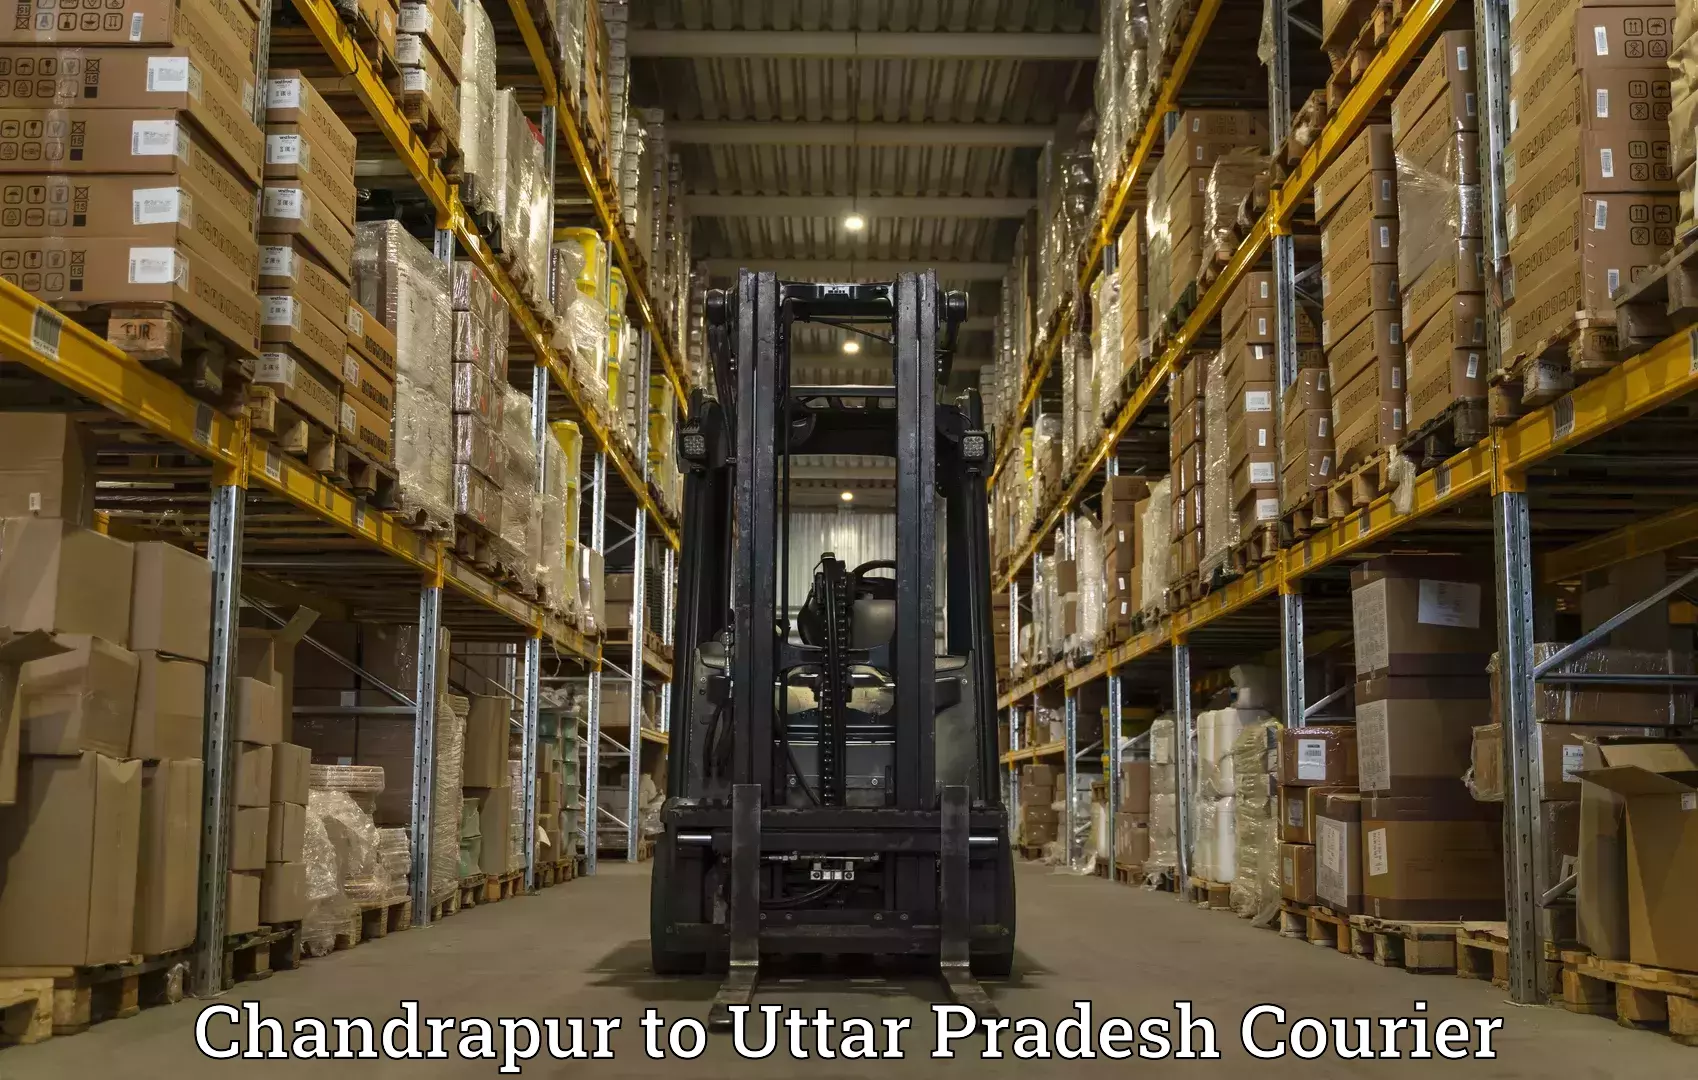 Quality courier partnerships Chandrapur to Aligarh